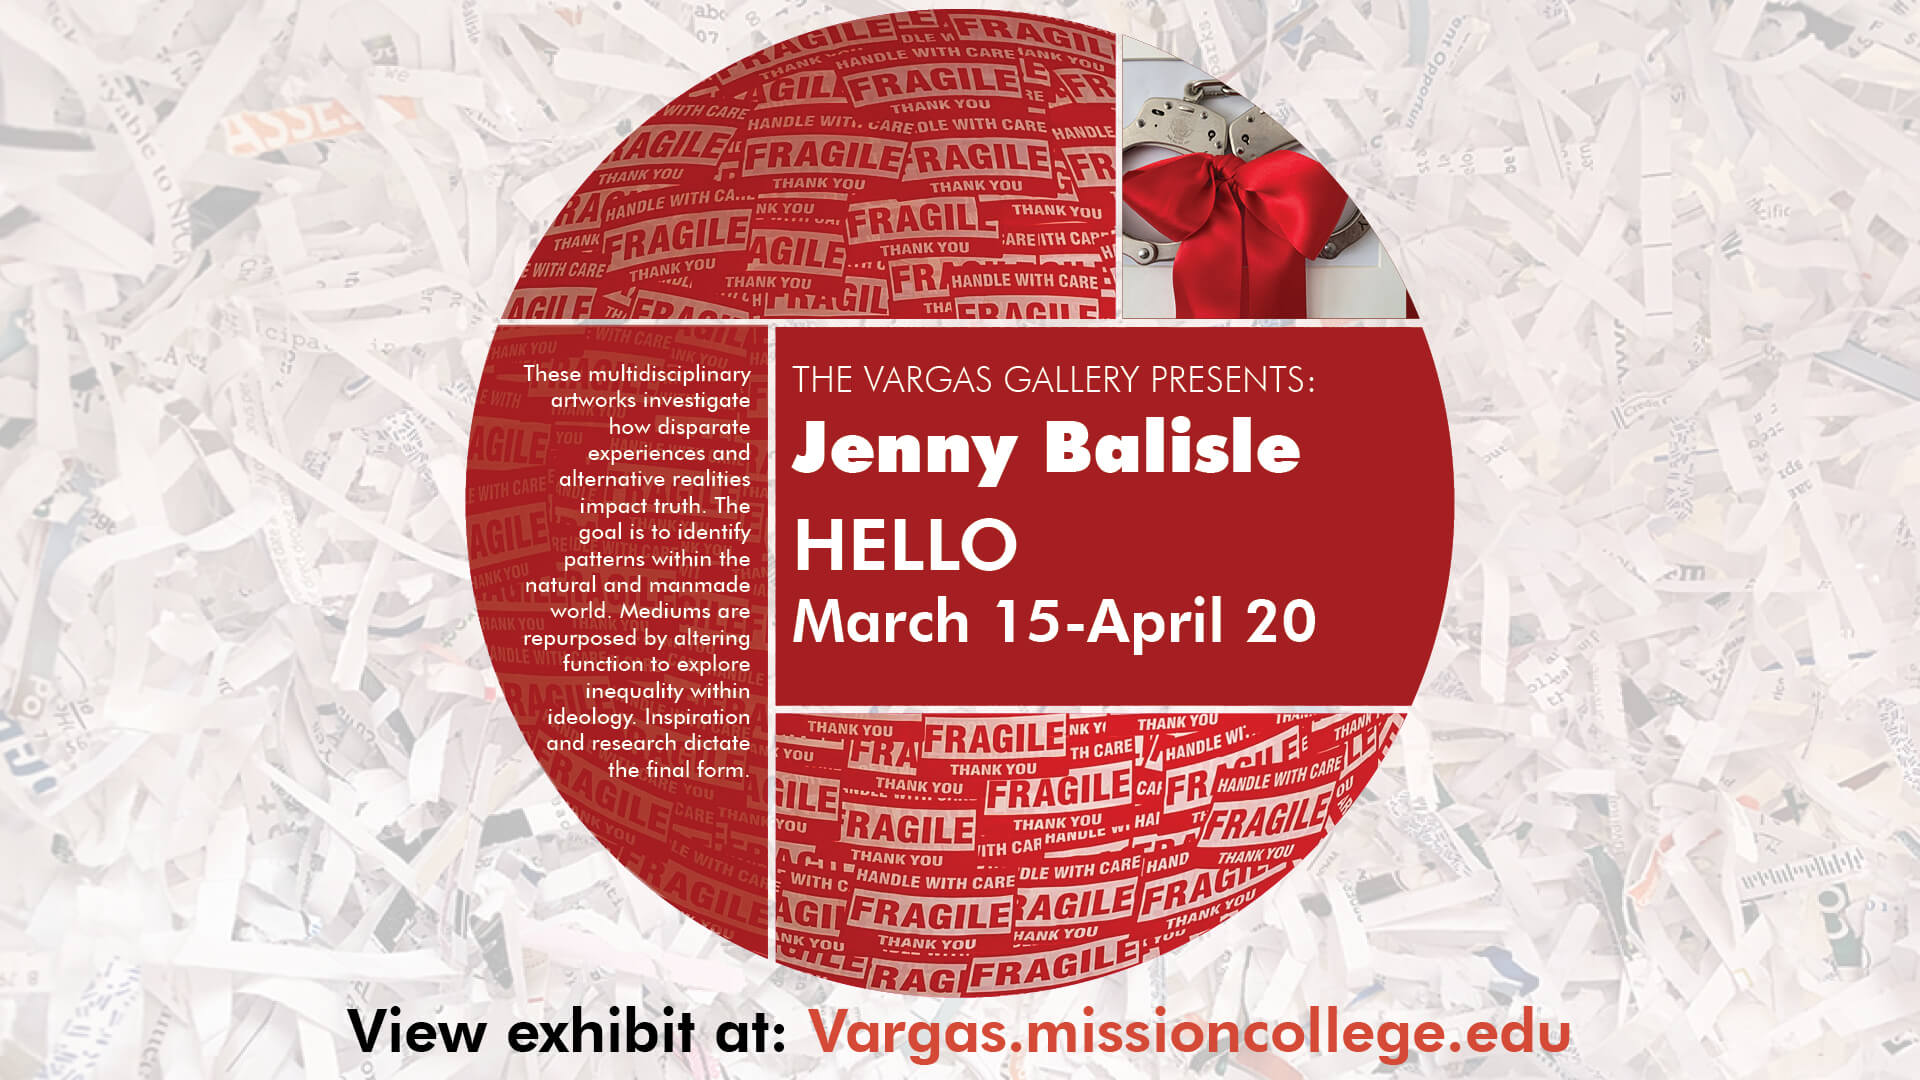 Jenny Balisle - "Hello" exhibition at the Mission College Vargas Gallery.